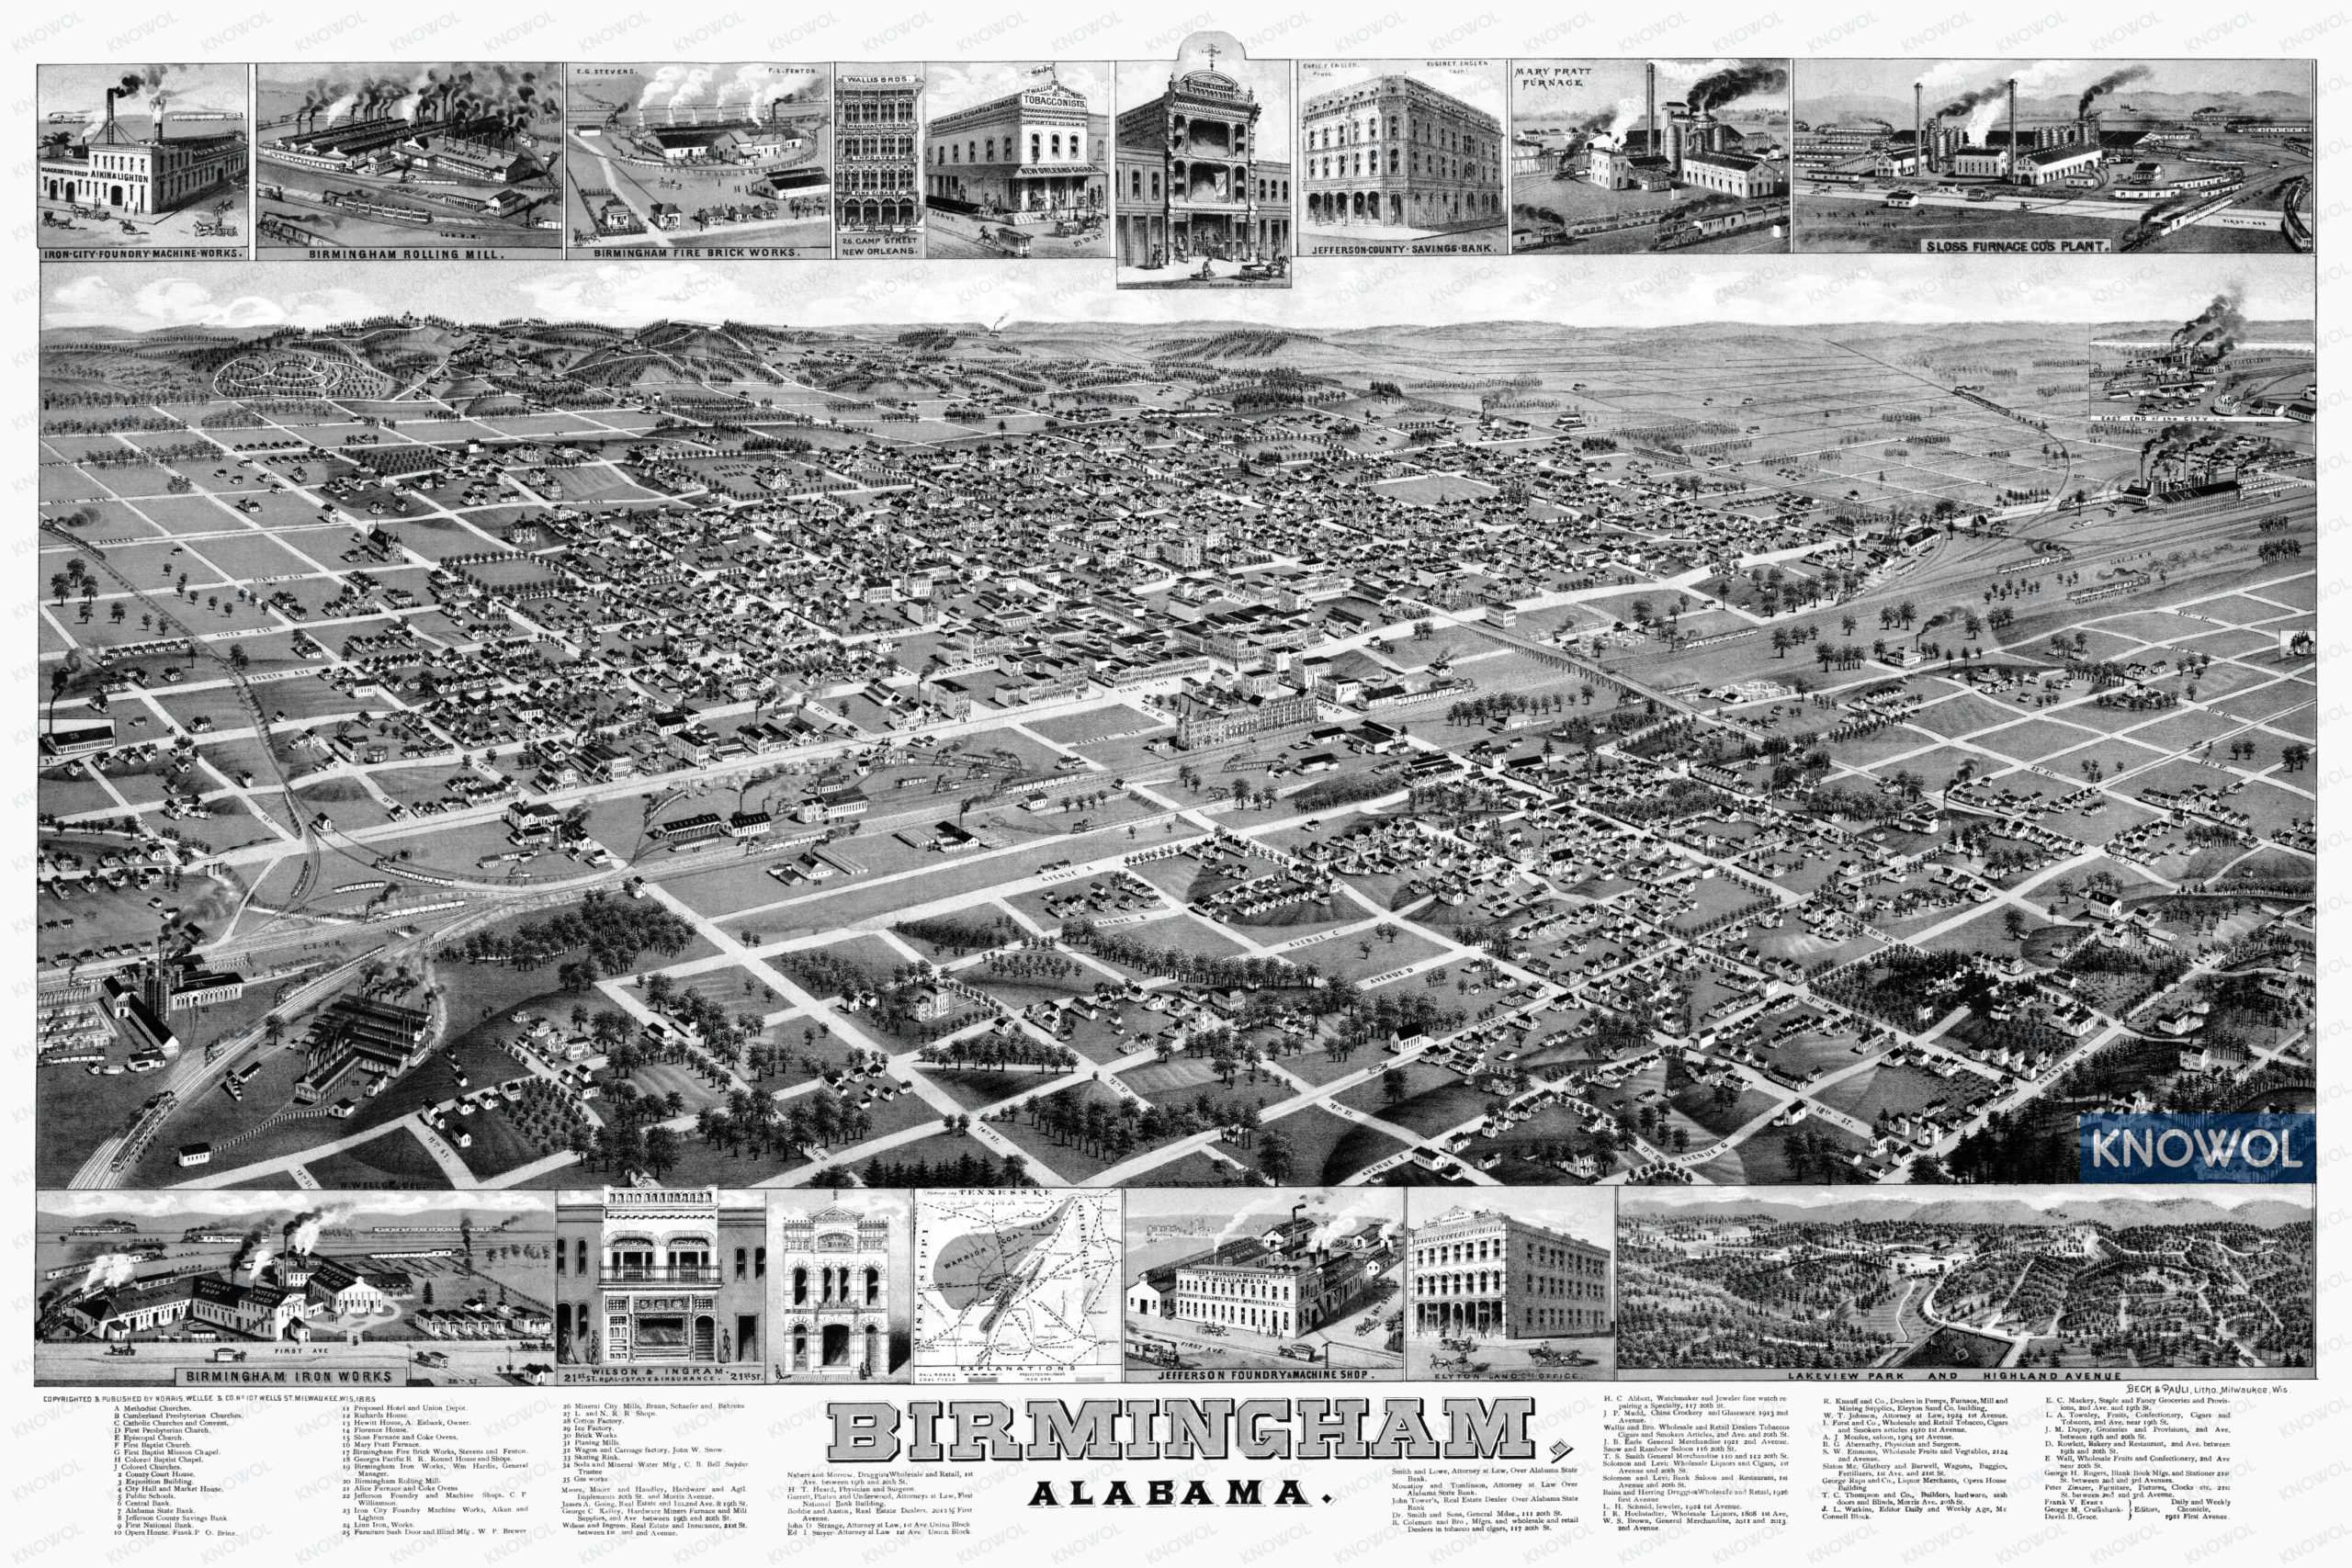 A historic bird's eye view of Birmingham, Alabama from 1885. The image is a map that shows Birmingham, Alabama as it looked in the late 19th century. The map shows landmarks, street names, and detailed drawings of the city.